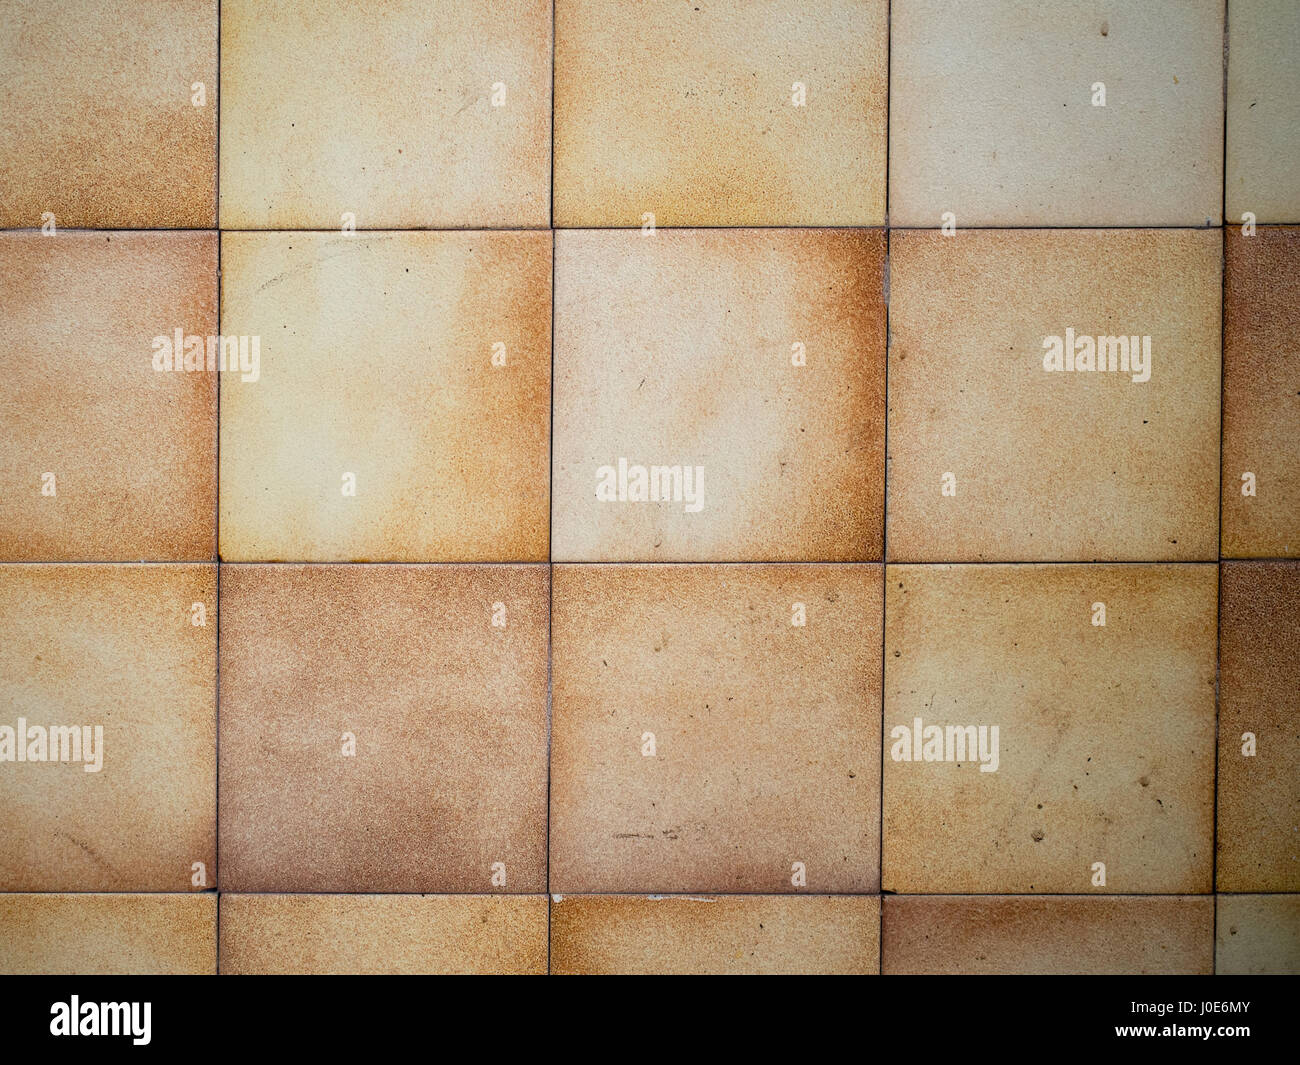 Vintage Rather Grimy Old Kitchen Tiles Without Grout Stock Photo